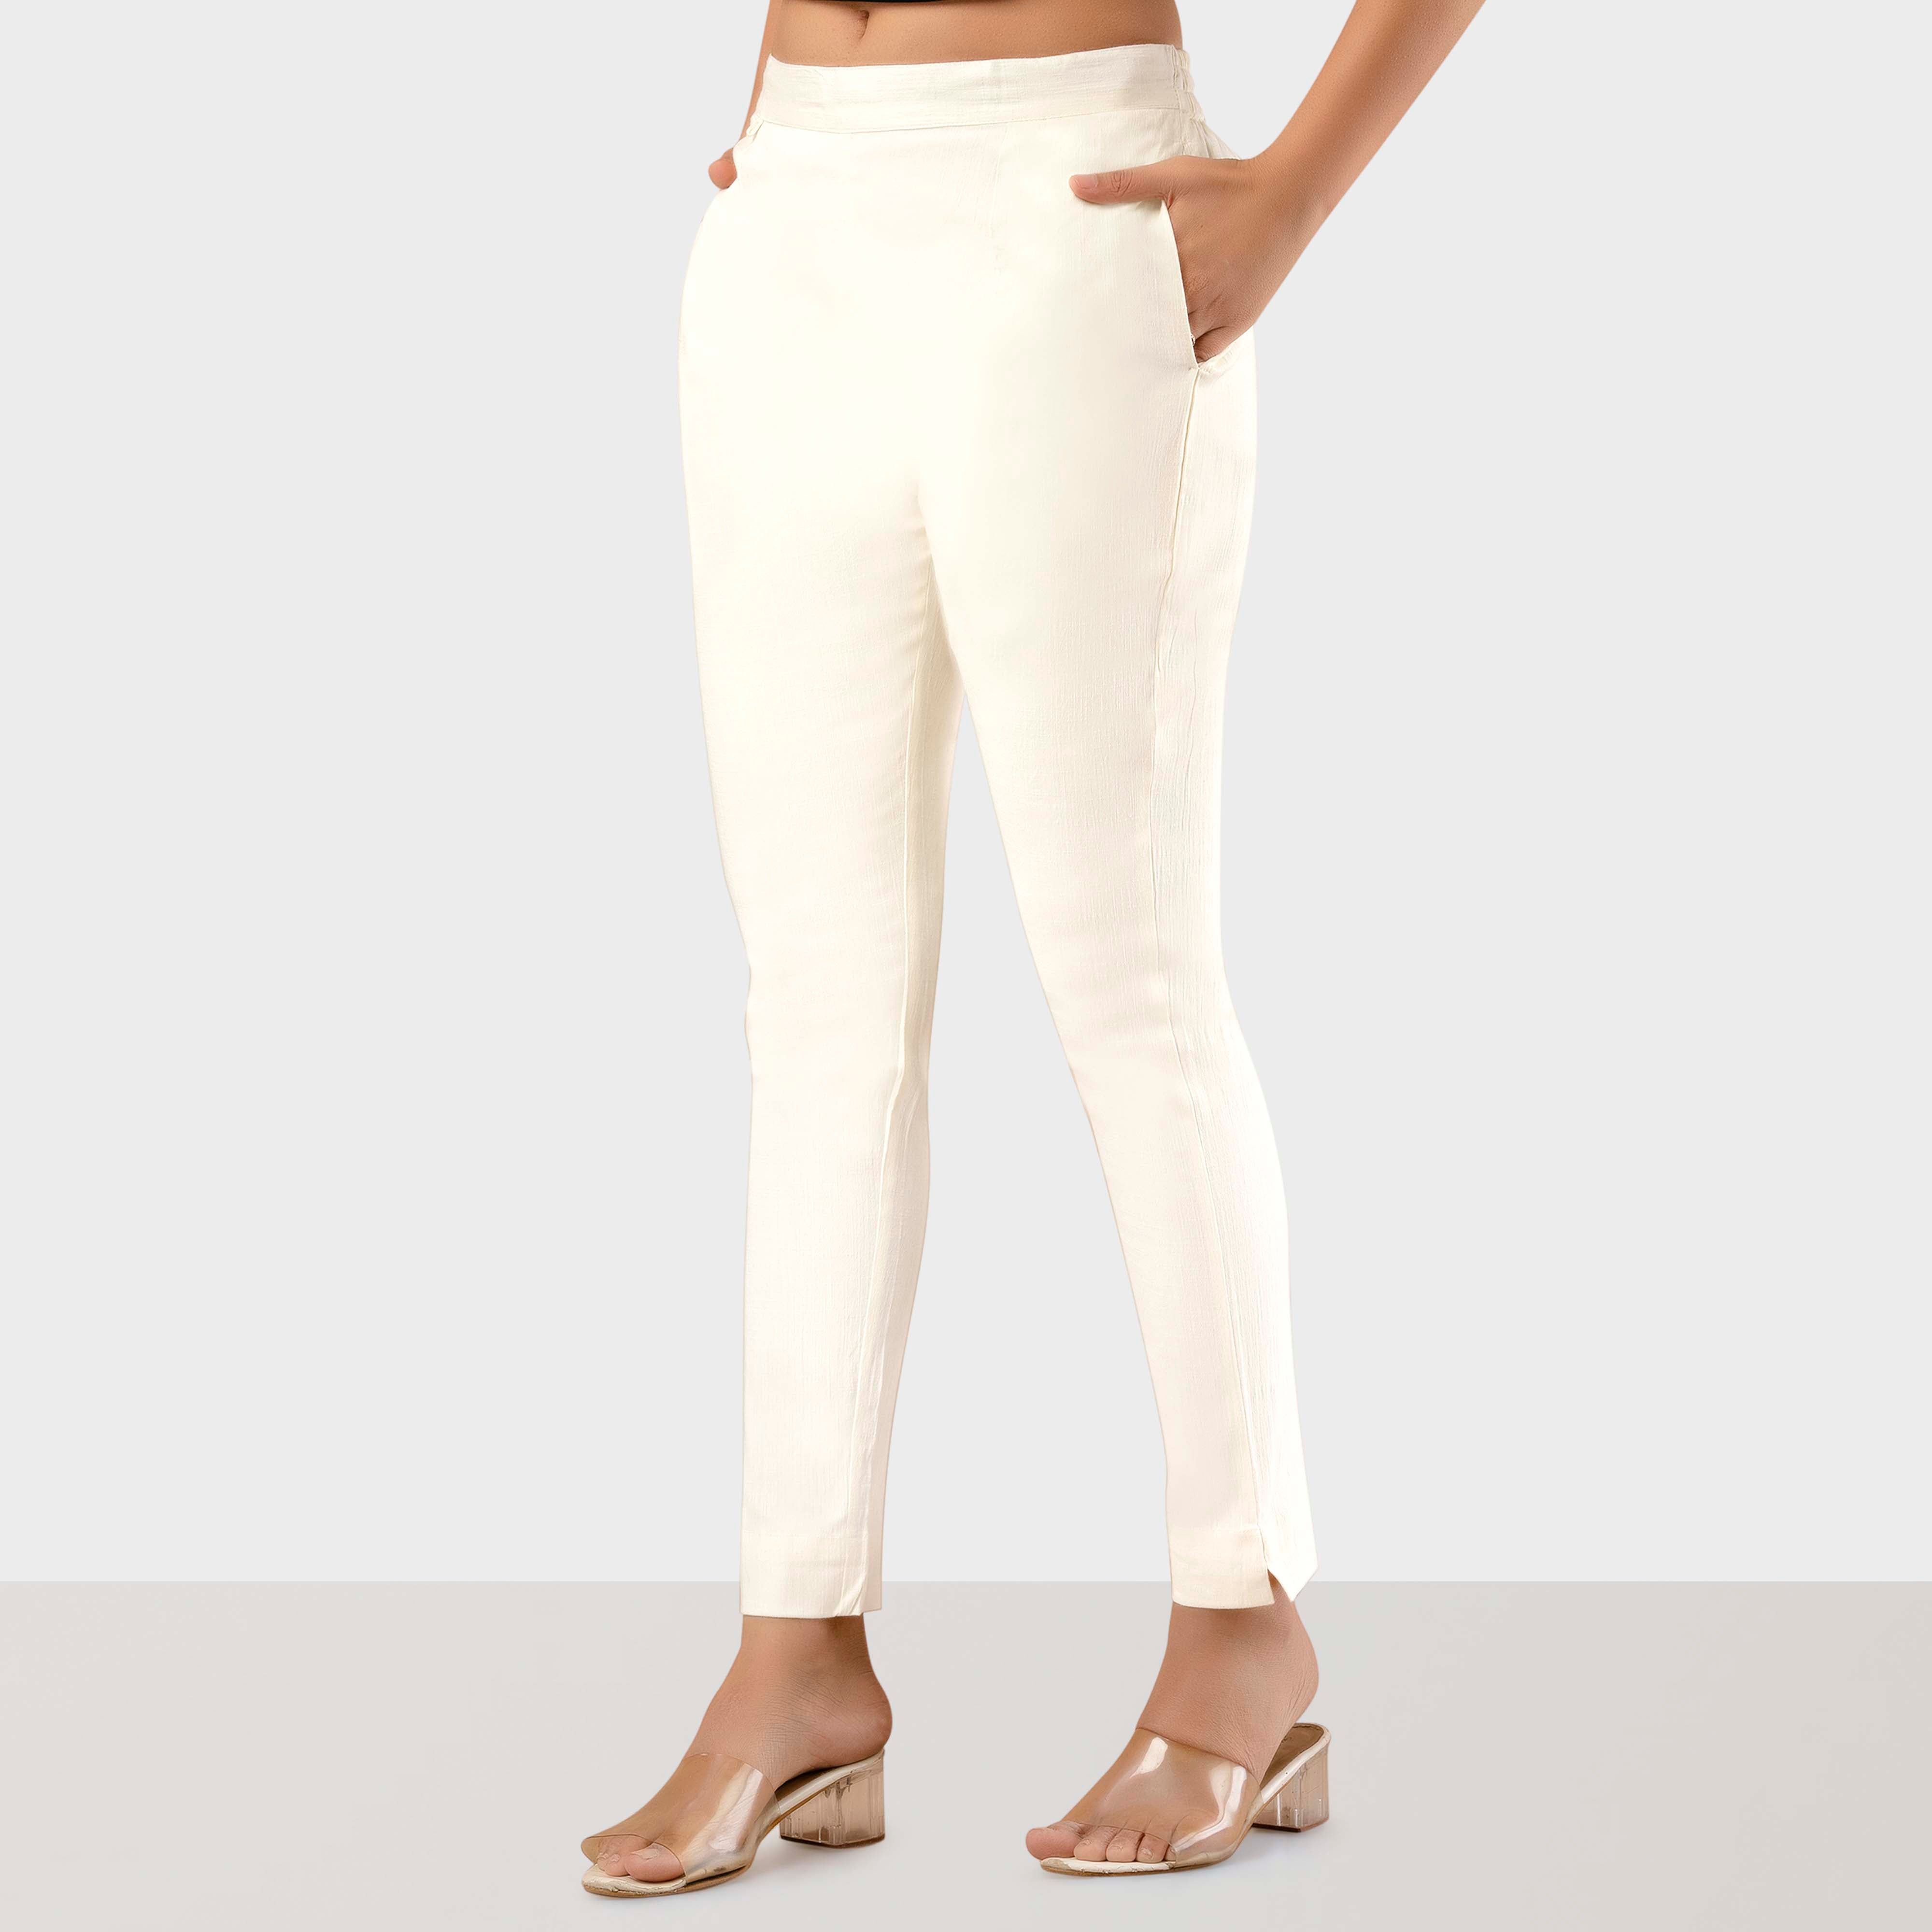 Women's Cream Elasticated Faux Leather Trouser | Gabbi | 4th & Reckless